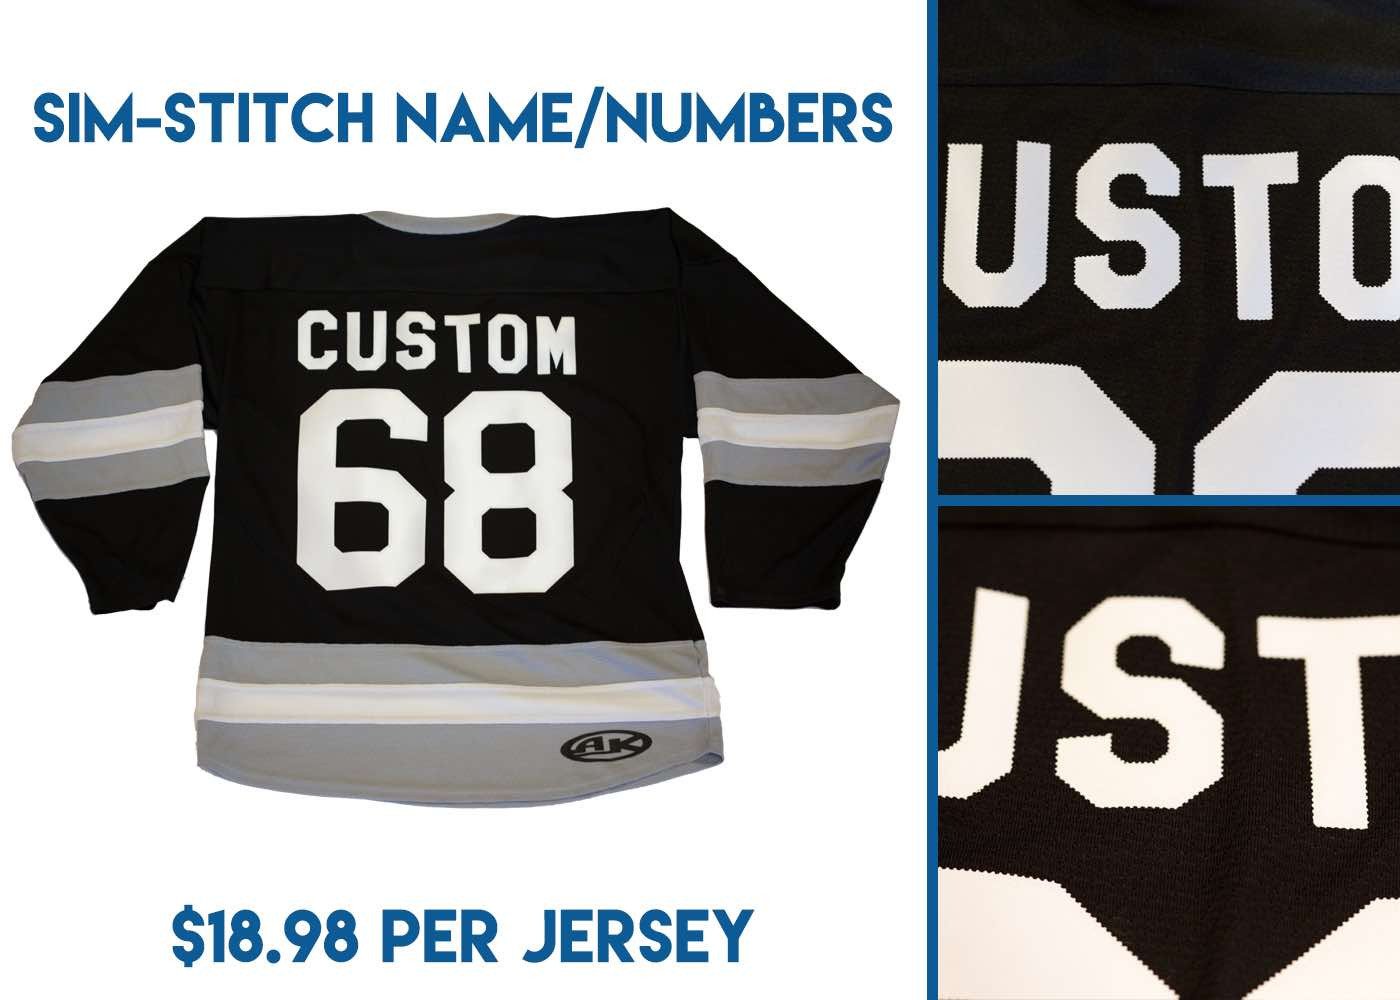 New York Rangers Custom Jersey - All Stitched